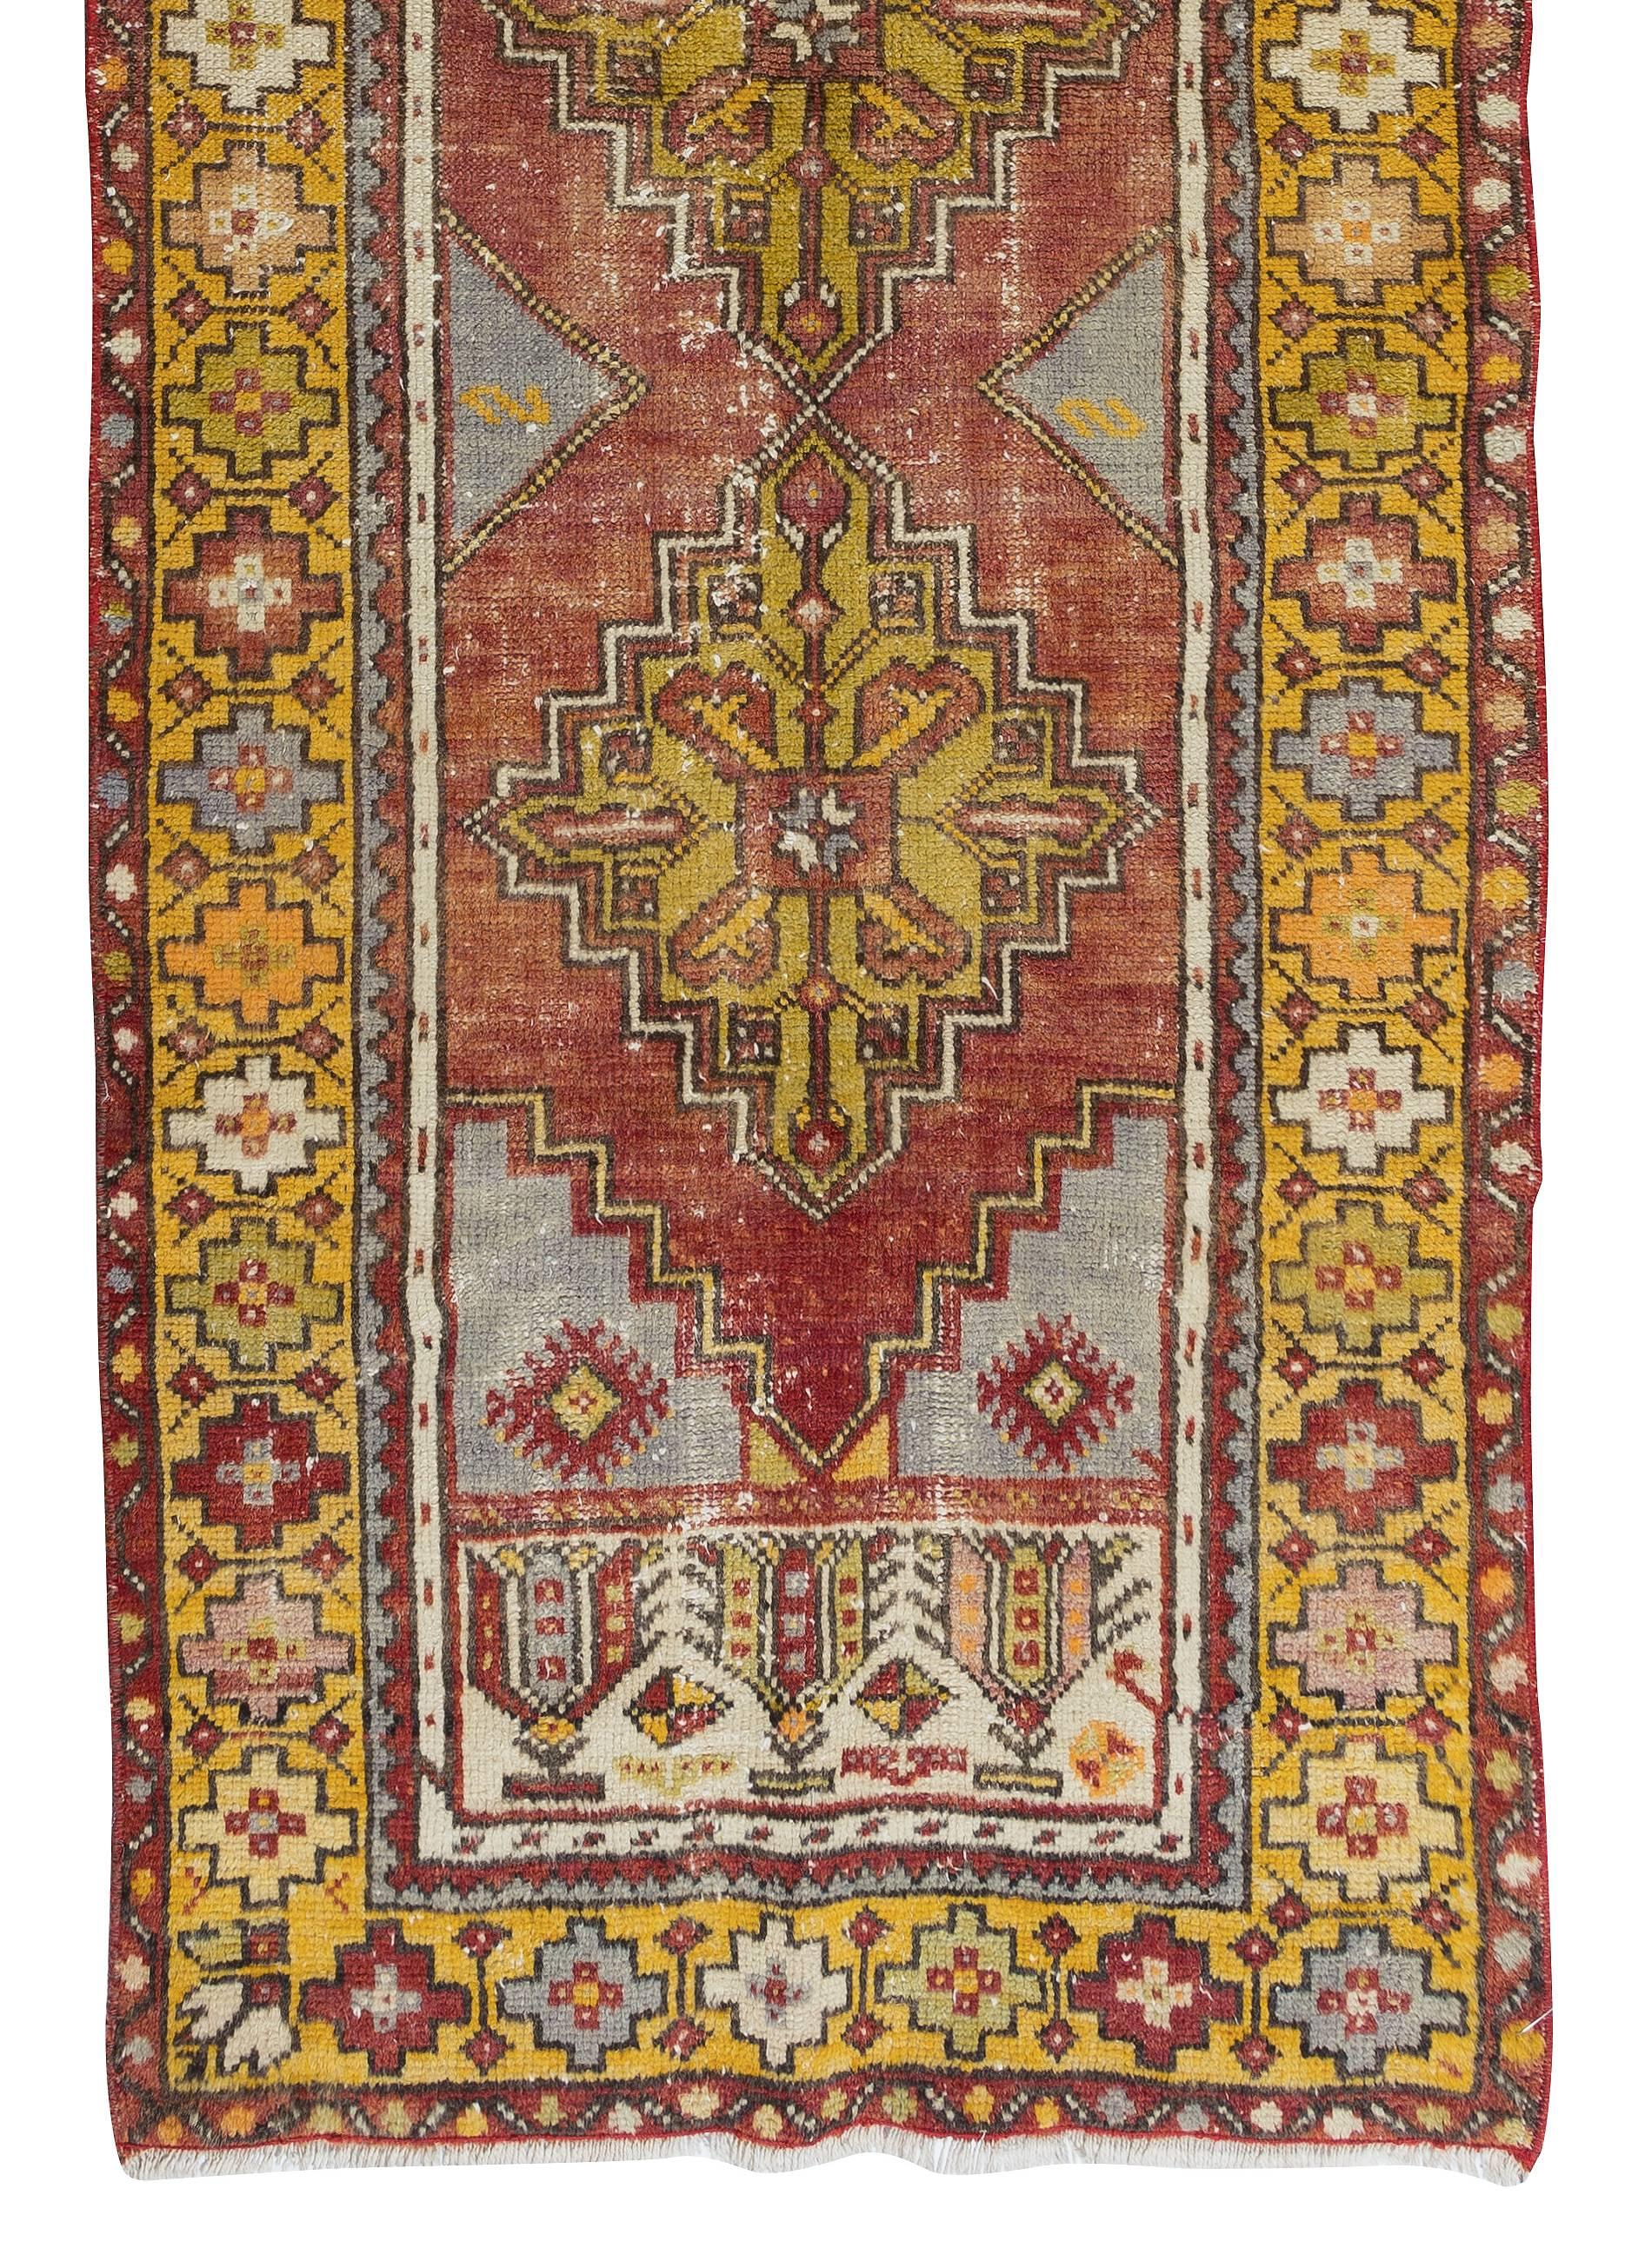 3x8.7 Ft Vintage Village Runner Rug from Turkey, Hand-Knotted Corridor Carpet In Good Condition For Sale In Philadelphia, PA